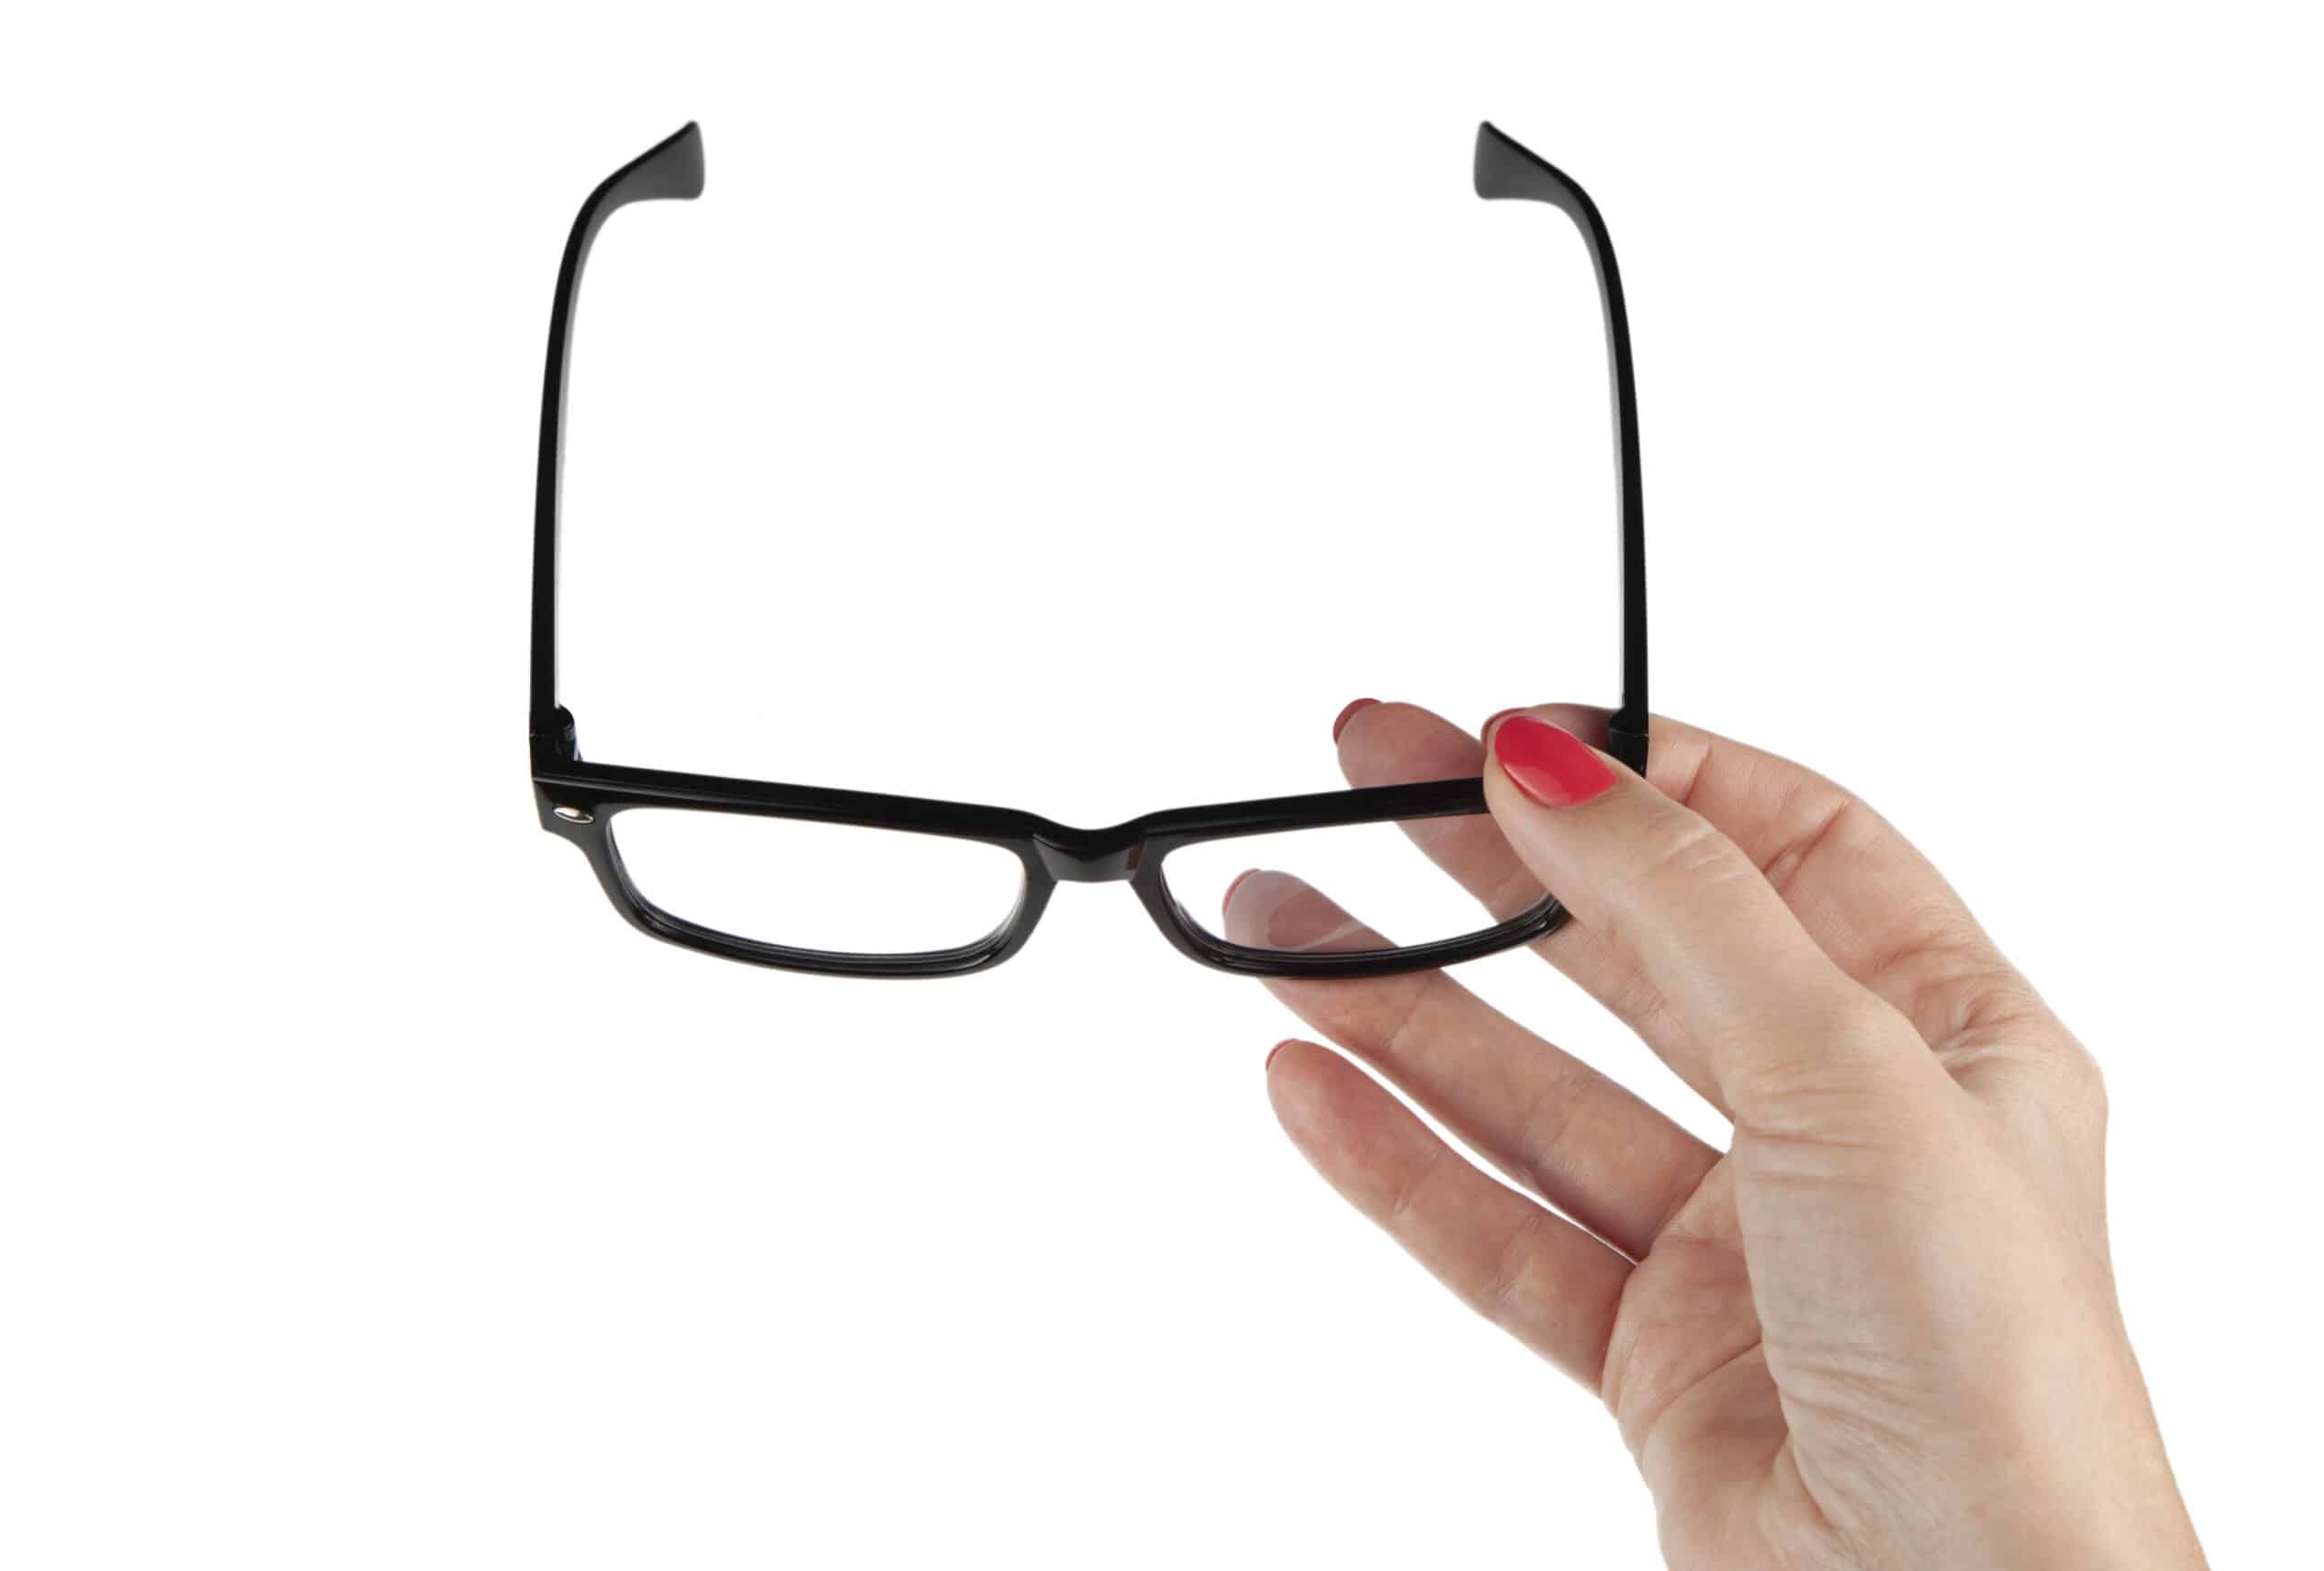 theprecisiontools.com : How to tighten glasses without using a screwdriver?